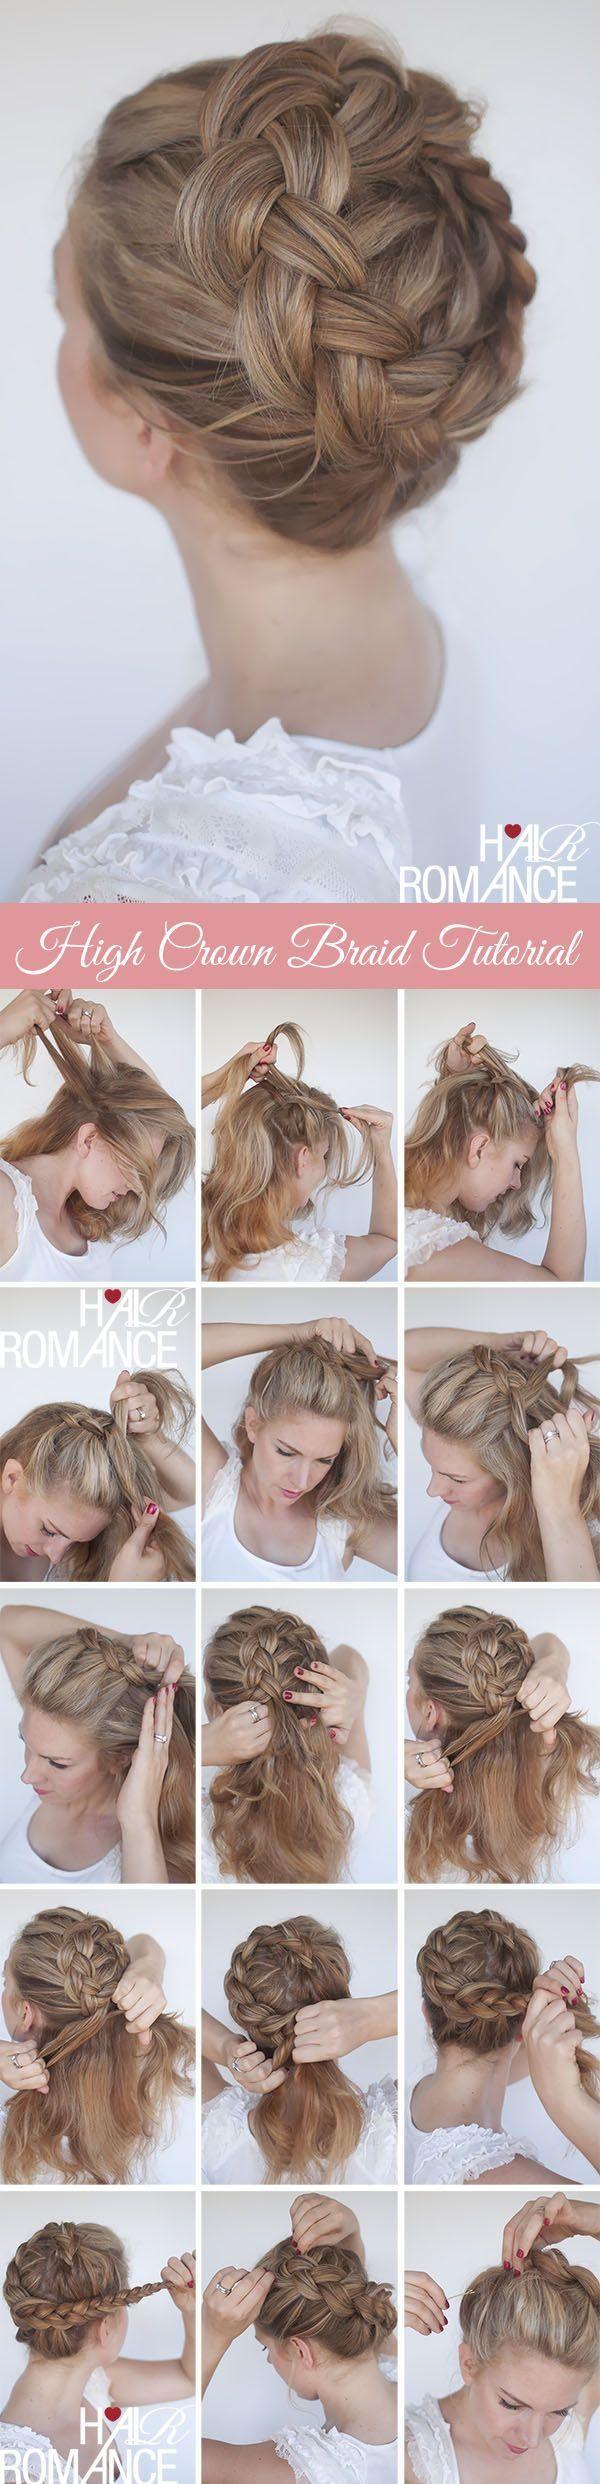 Hochzeit - 15 Braided Hairstyles That Will Look Amazing With Your Prom Dress